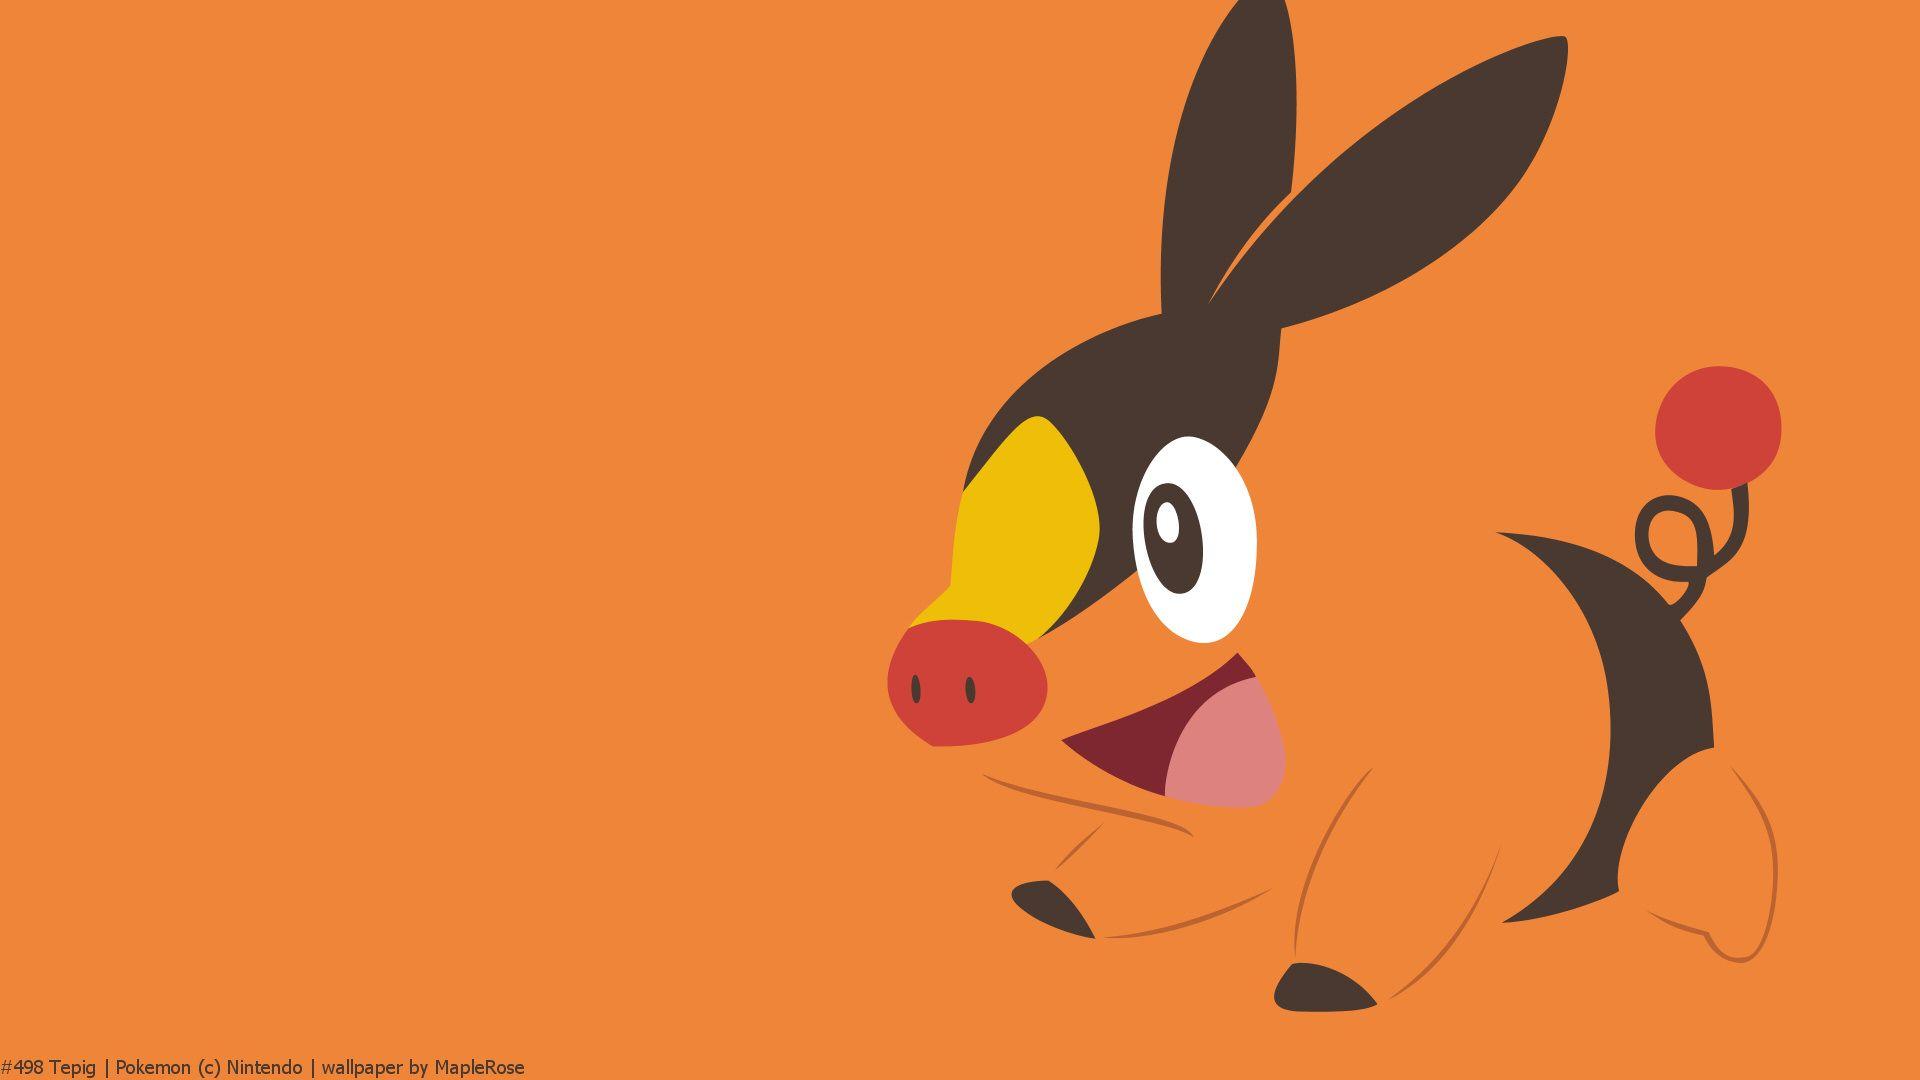 Tepig hd wallpapers